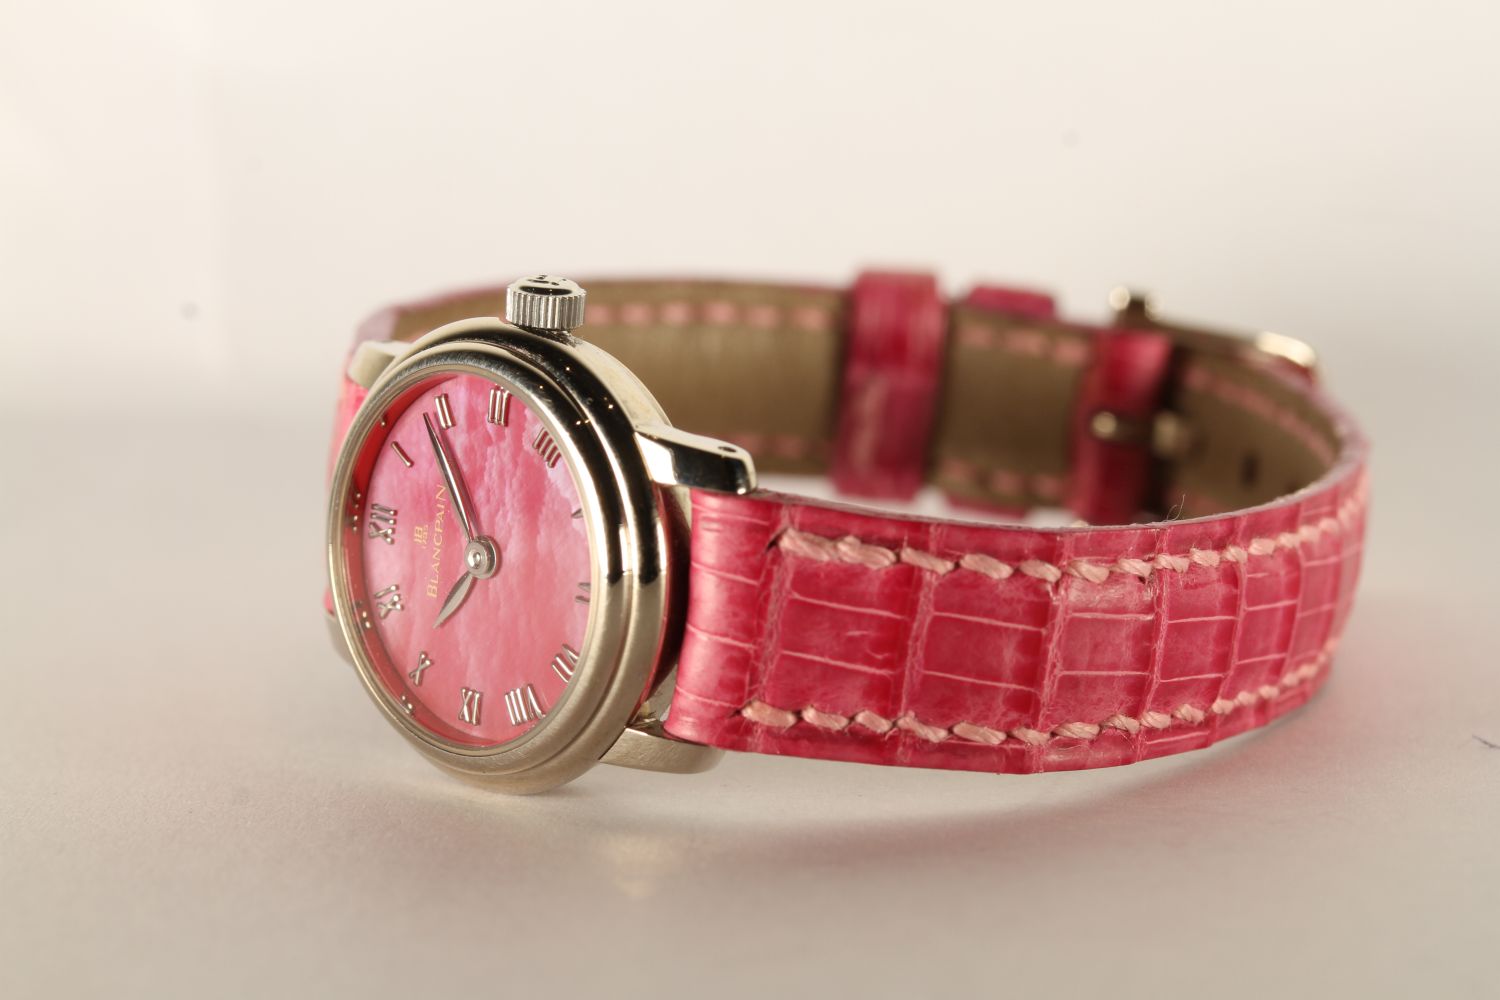 NOS LADIES BLANCPAIN LADYBIRD WRISTWATCH, circular pink mother of pearl dial with roman numerals, - Image 2 of 4